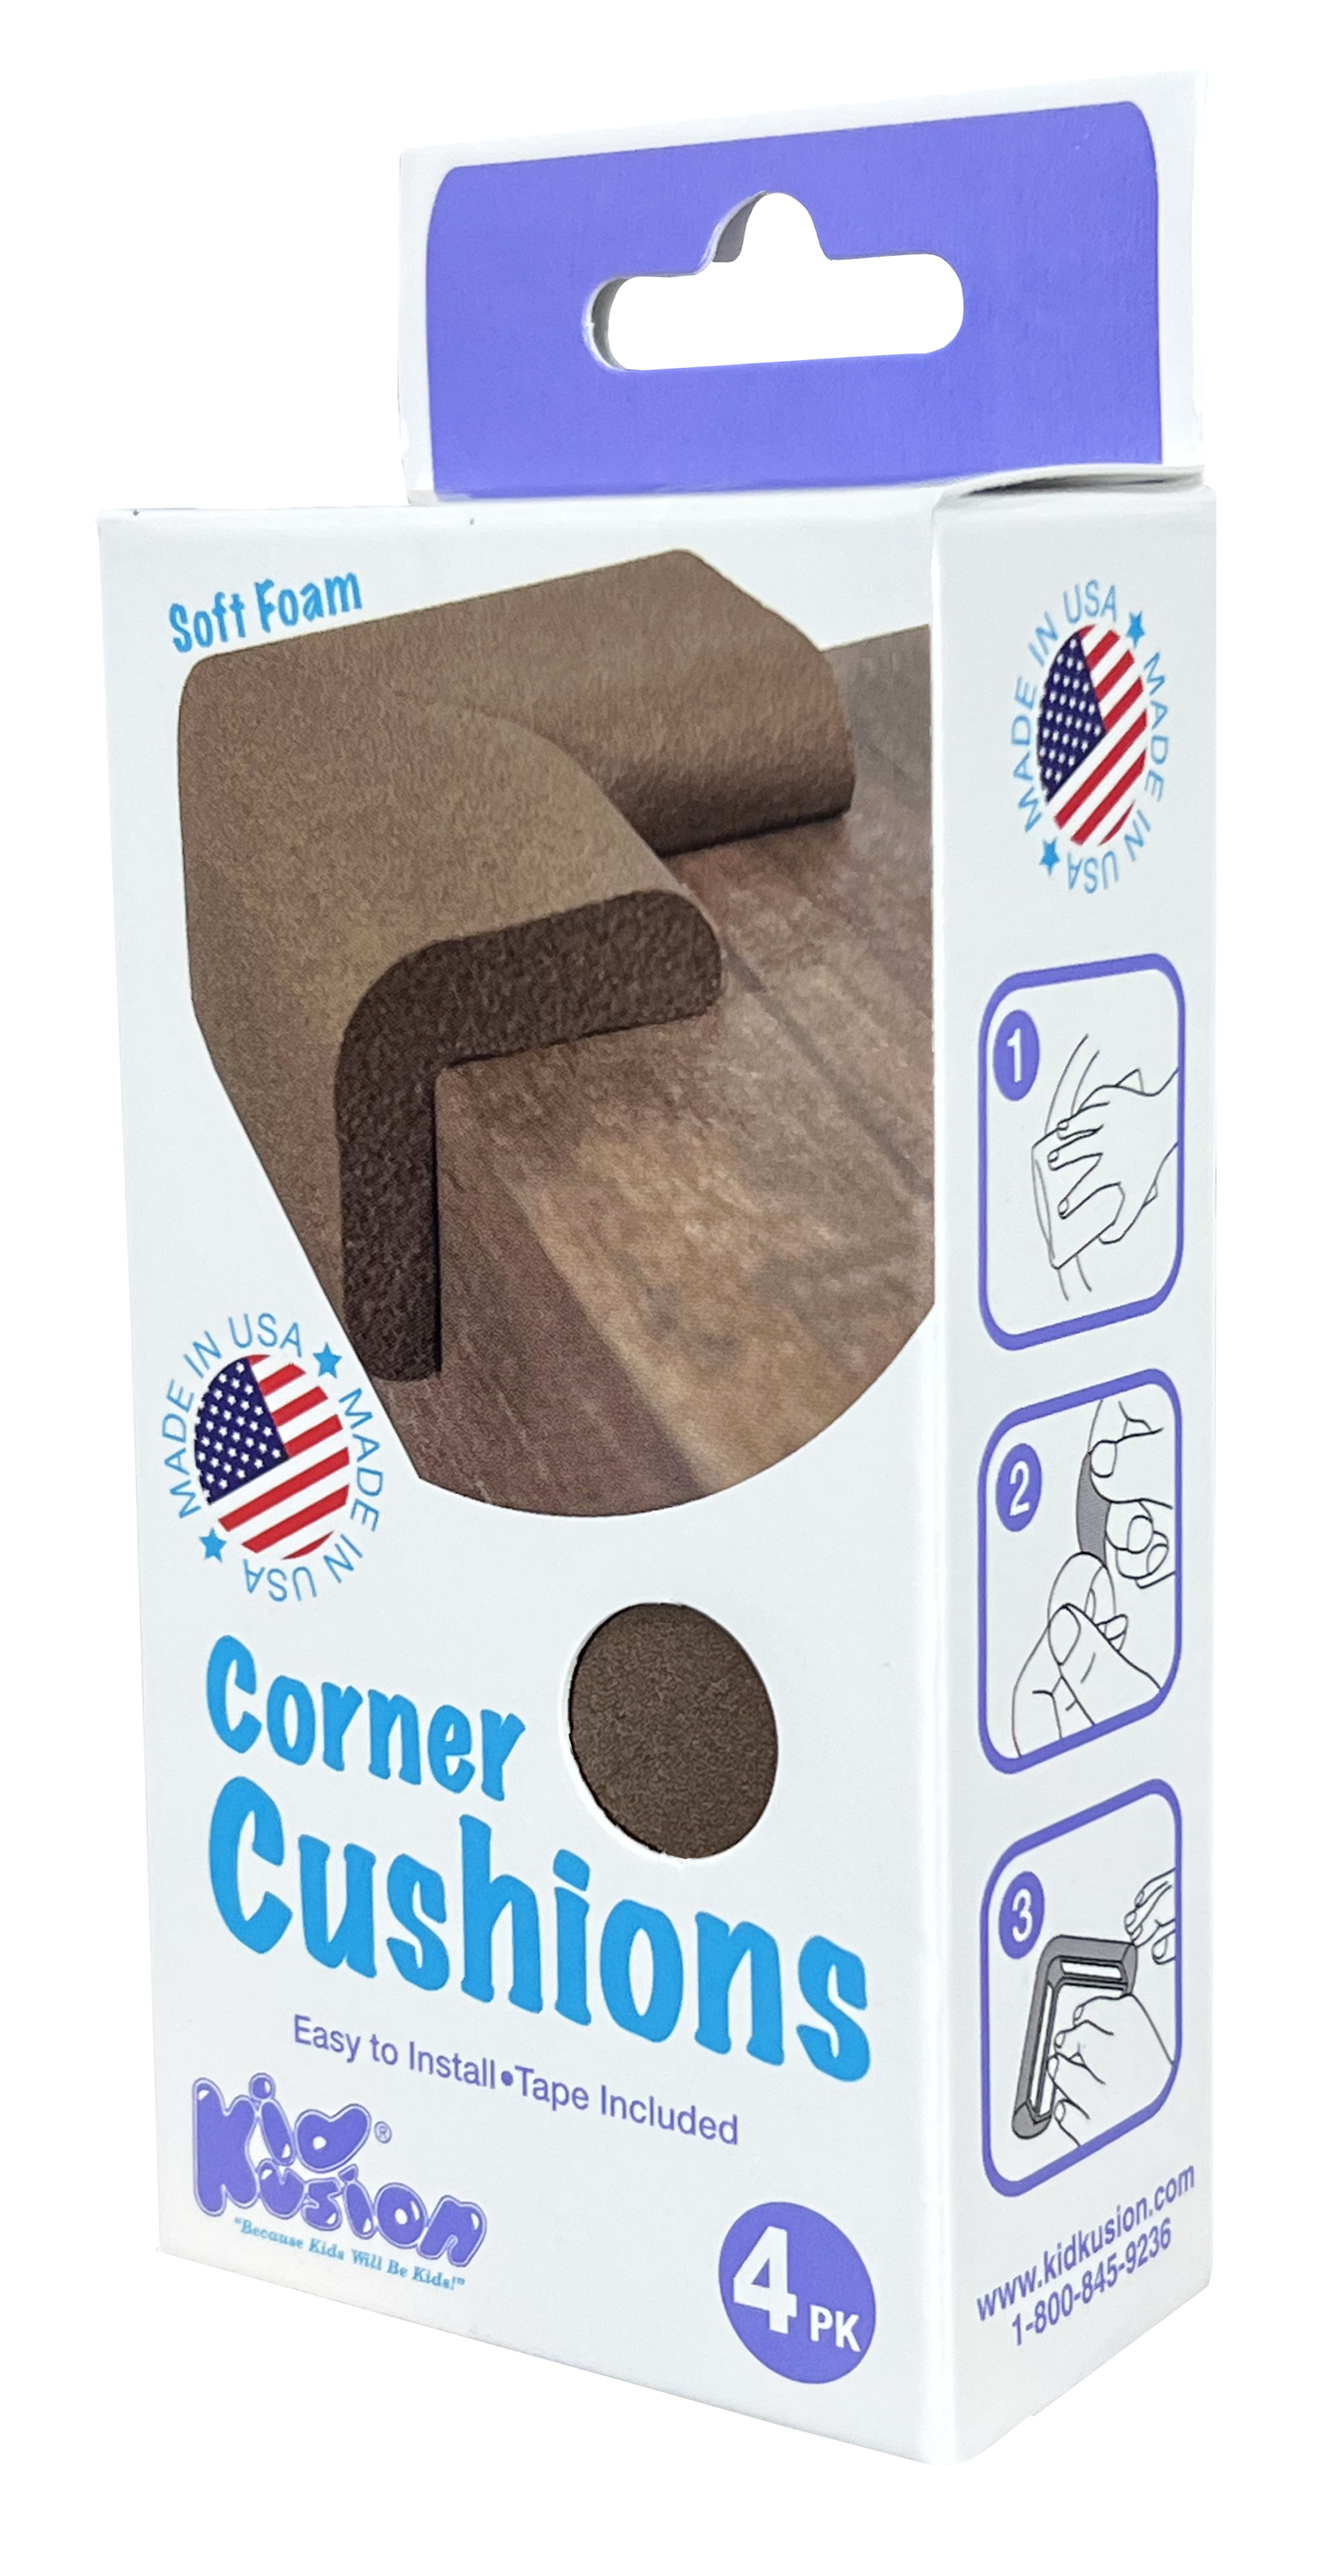 KidKusion Baby Proofing Foam Rubber Corner Cushions, Brown, Corner Protector for Tables, Furniture and more, 4.0 CT - image 4 of 9